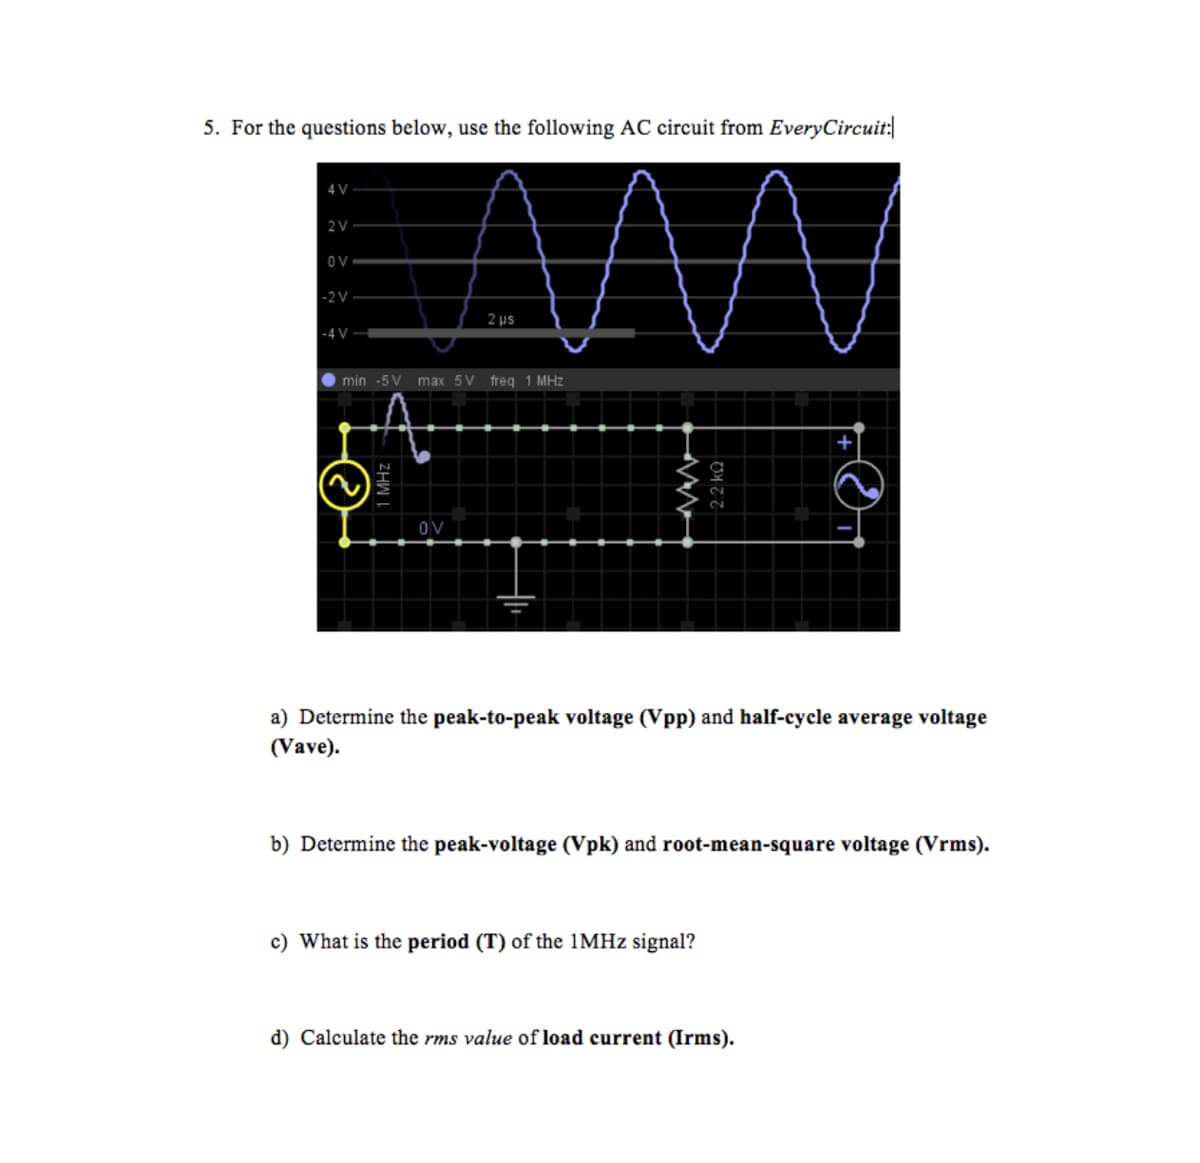 5. For the questions below, use the following AC circuit from EveryCircuit:|
4 V
2 V
OV
-2 V
2 µs
-4 V -
min -5 V max 5V freq 1 MHz
OV
a) Determine the peak-to-peak voltage (Vpp) and half-cycle average voltage
(Vave).
b) Determine the peak-voltage (Vpk) and root-mean-square voltage (Vrms).
c) What is the period (T) of the 1MHZ signal?
d) Calculate the rms value of load current (Irms).
2.2 ko
